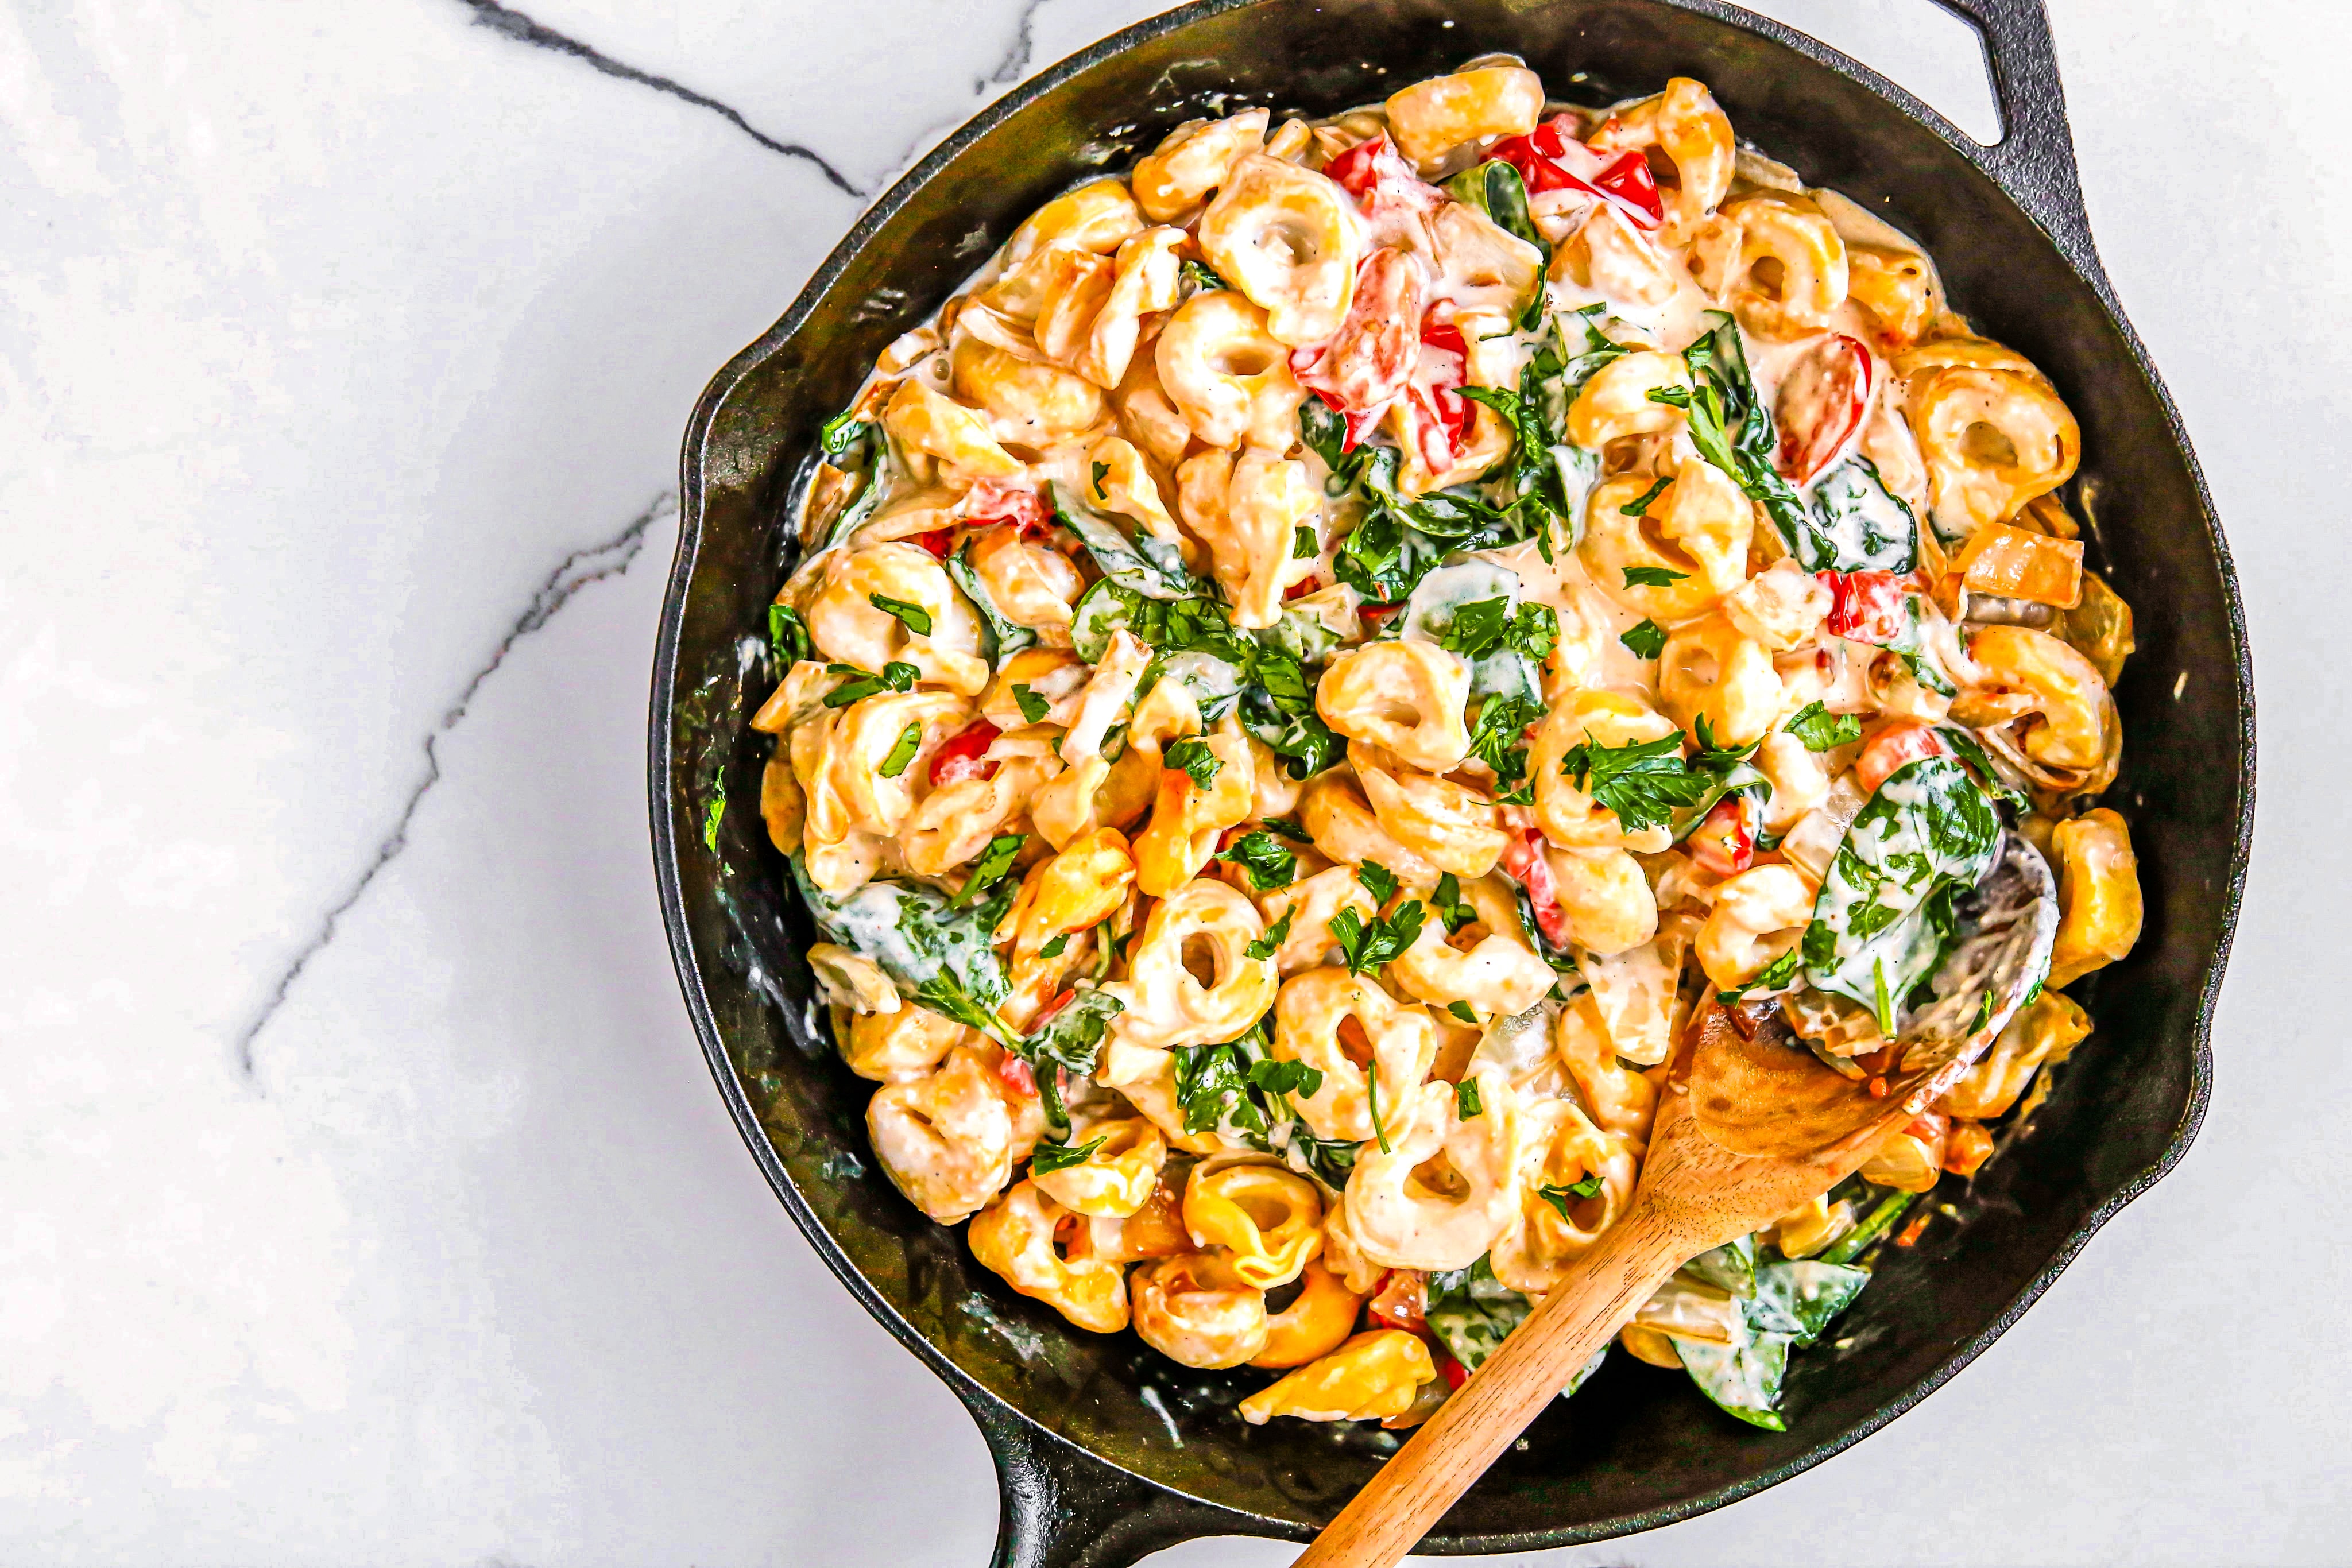 A white bowl of Creamy Spinach Alfredo Tortellini in a cast iron skillet with wooden spoon.